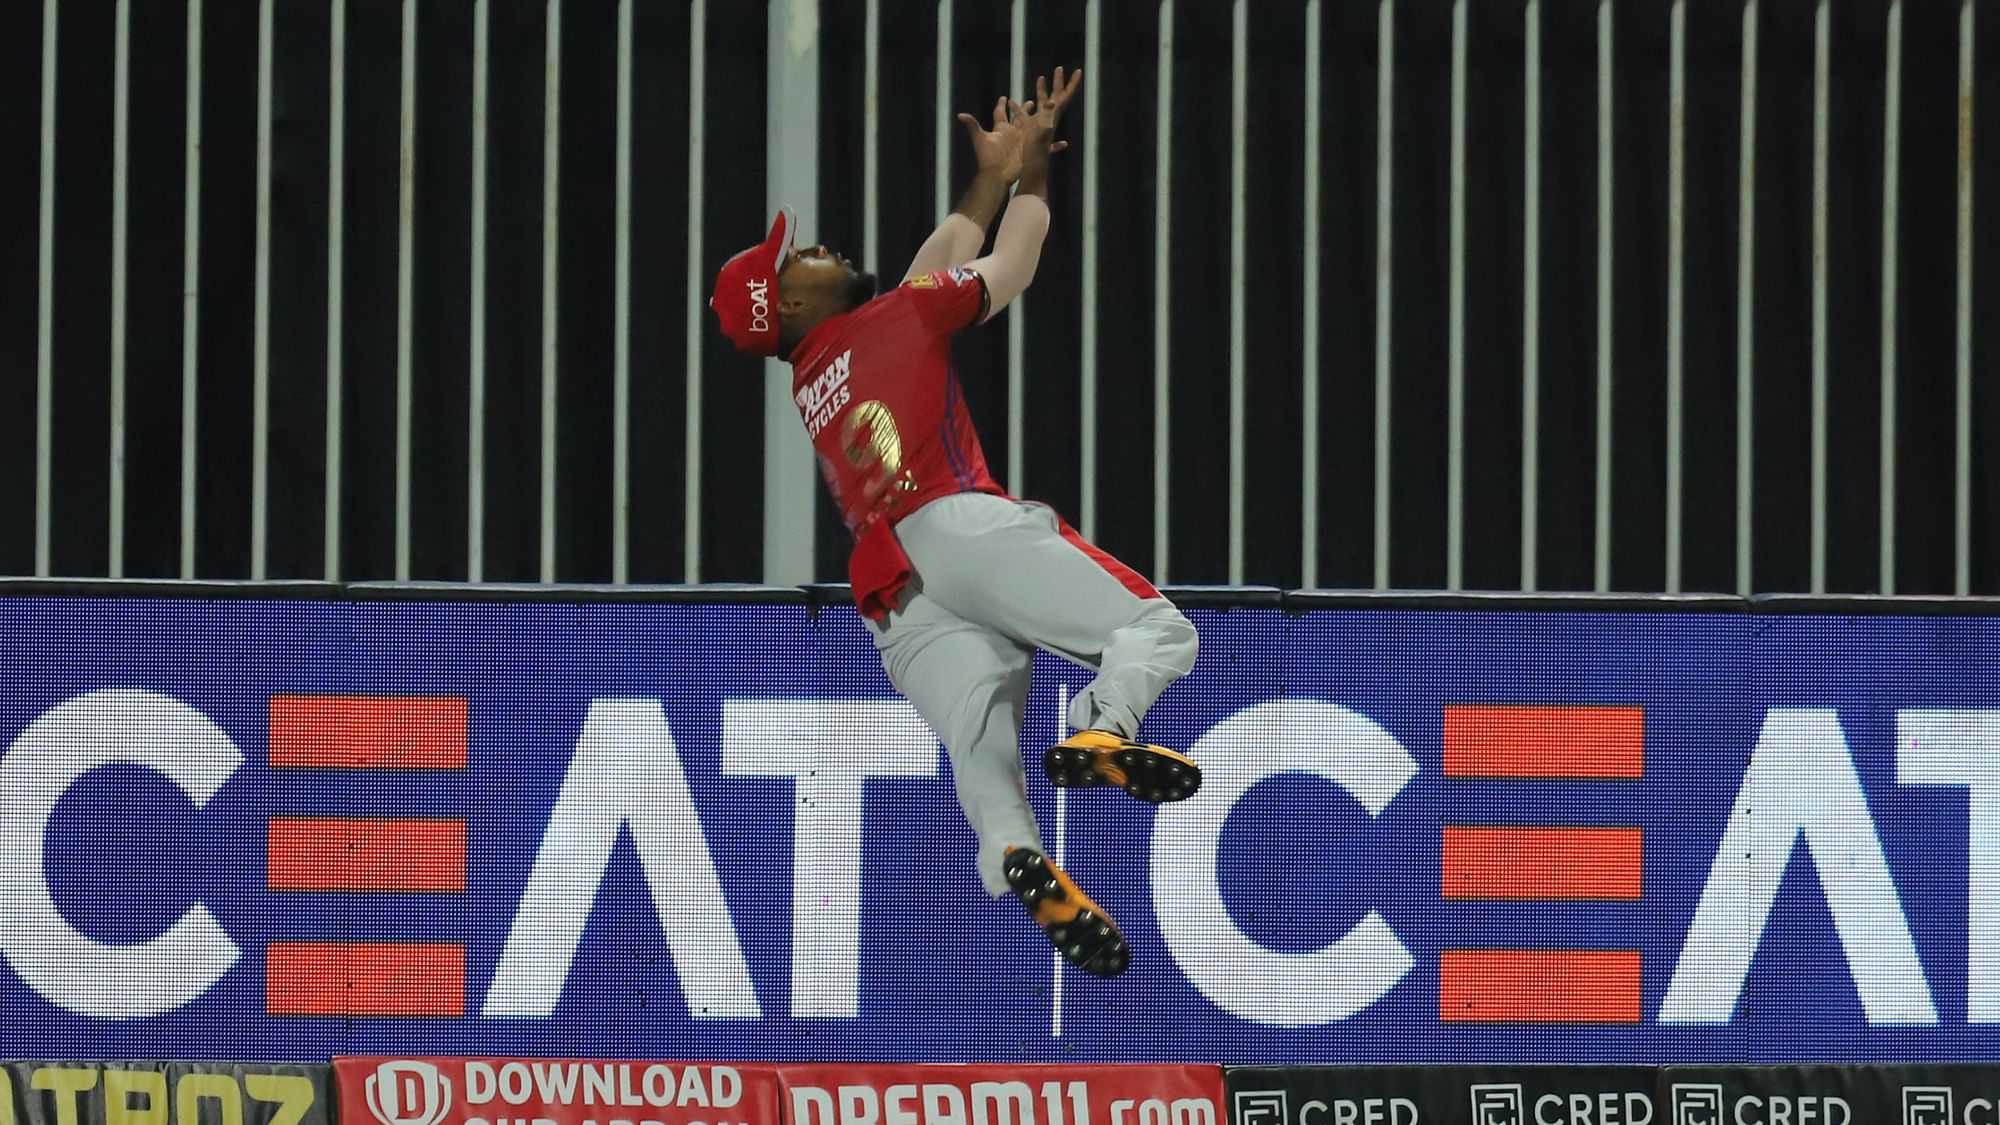 Kings XI Punjab’s Nicholas Pooran displayed an unbelievable piece of fielding during their Indian Premier League match against Rajasthan Royals.